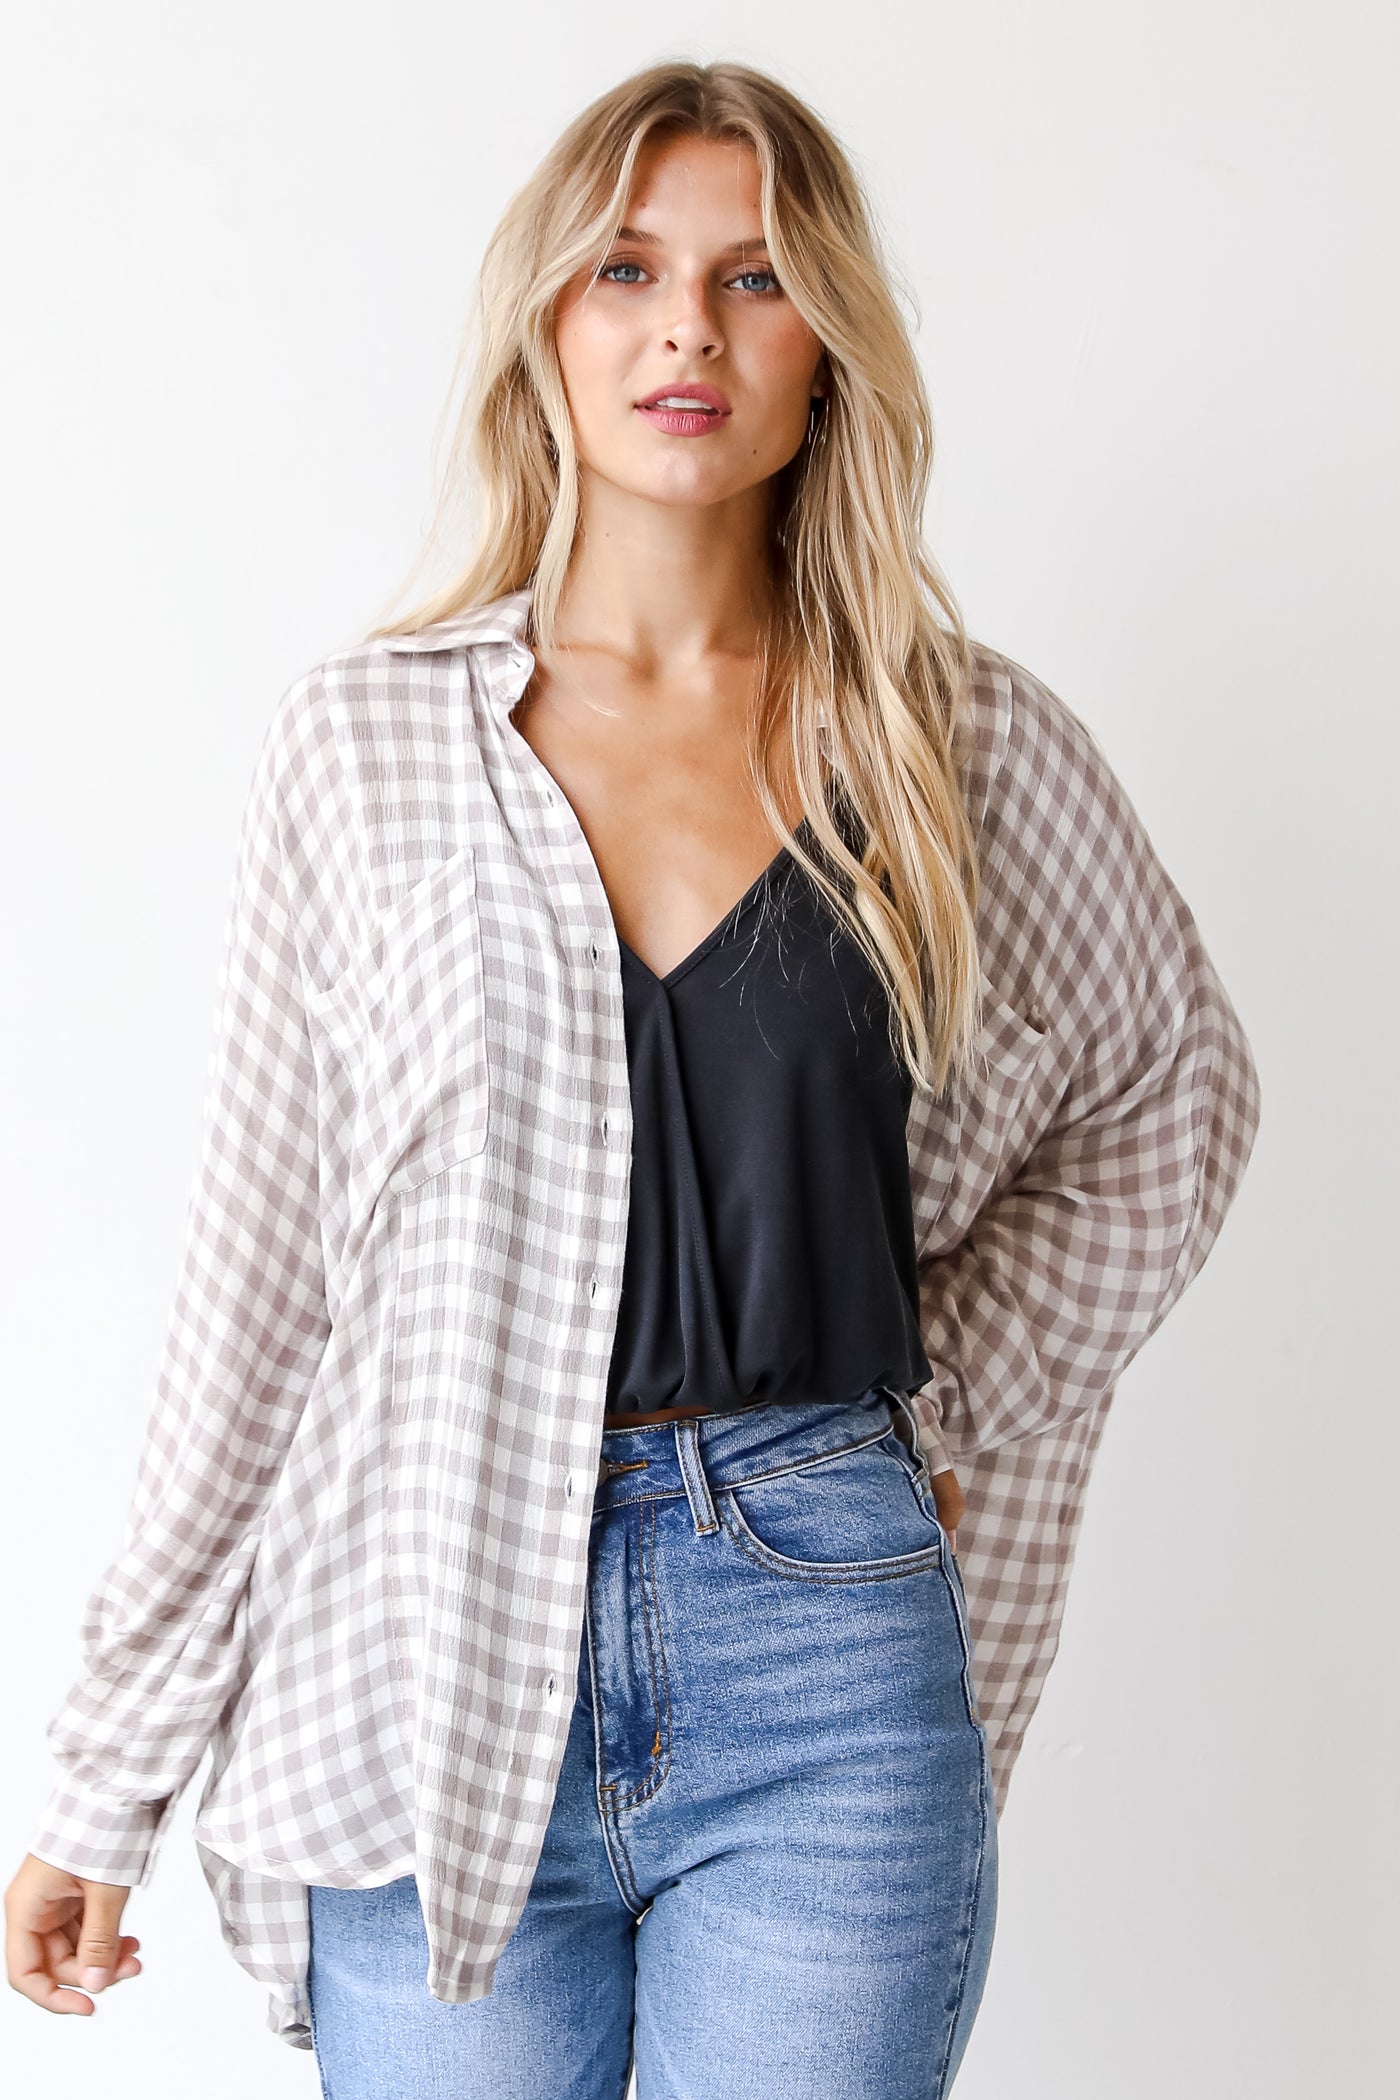 model wearing a grey Plaid Checkered Flannel